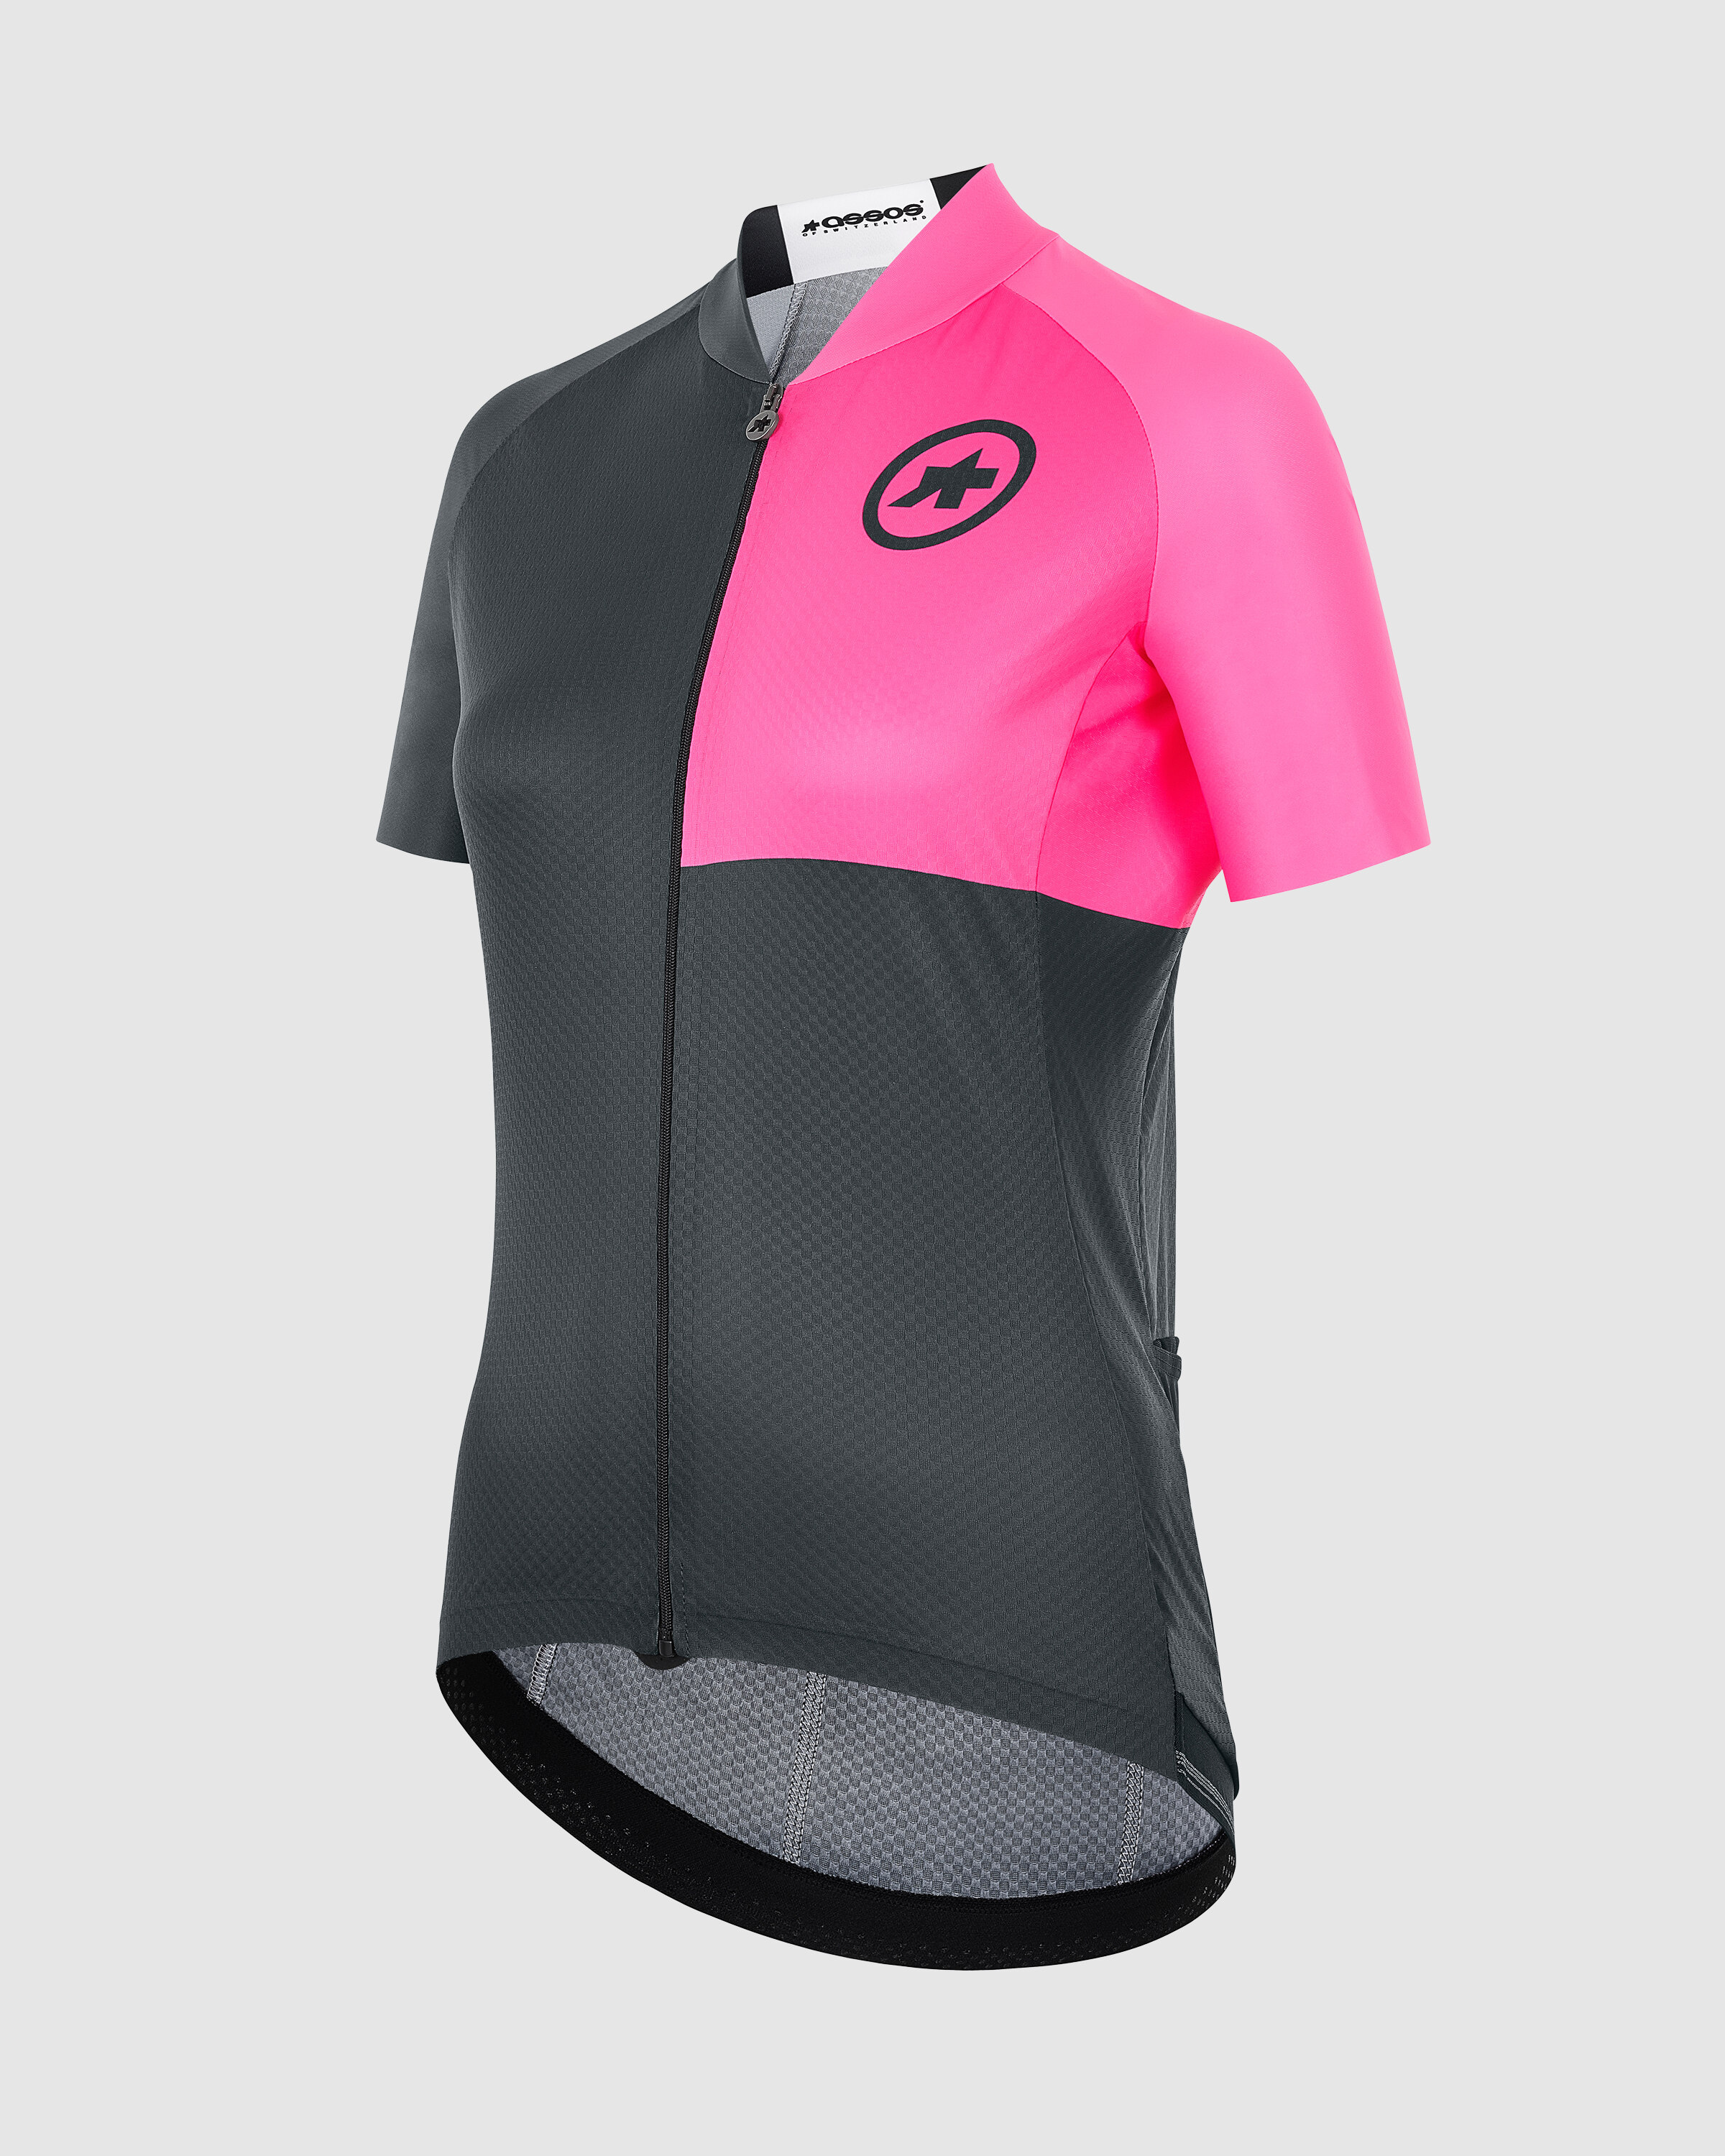 UMA GT Jersey C2 EVO Stahlstern - ASSOS Of Switzerland - Official Outlet